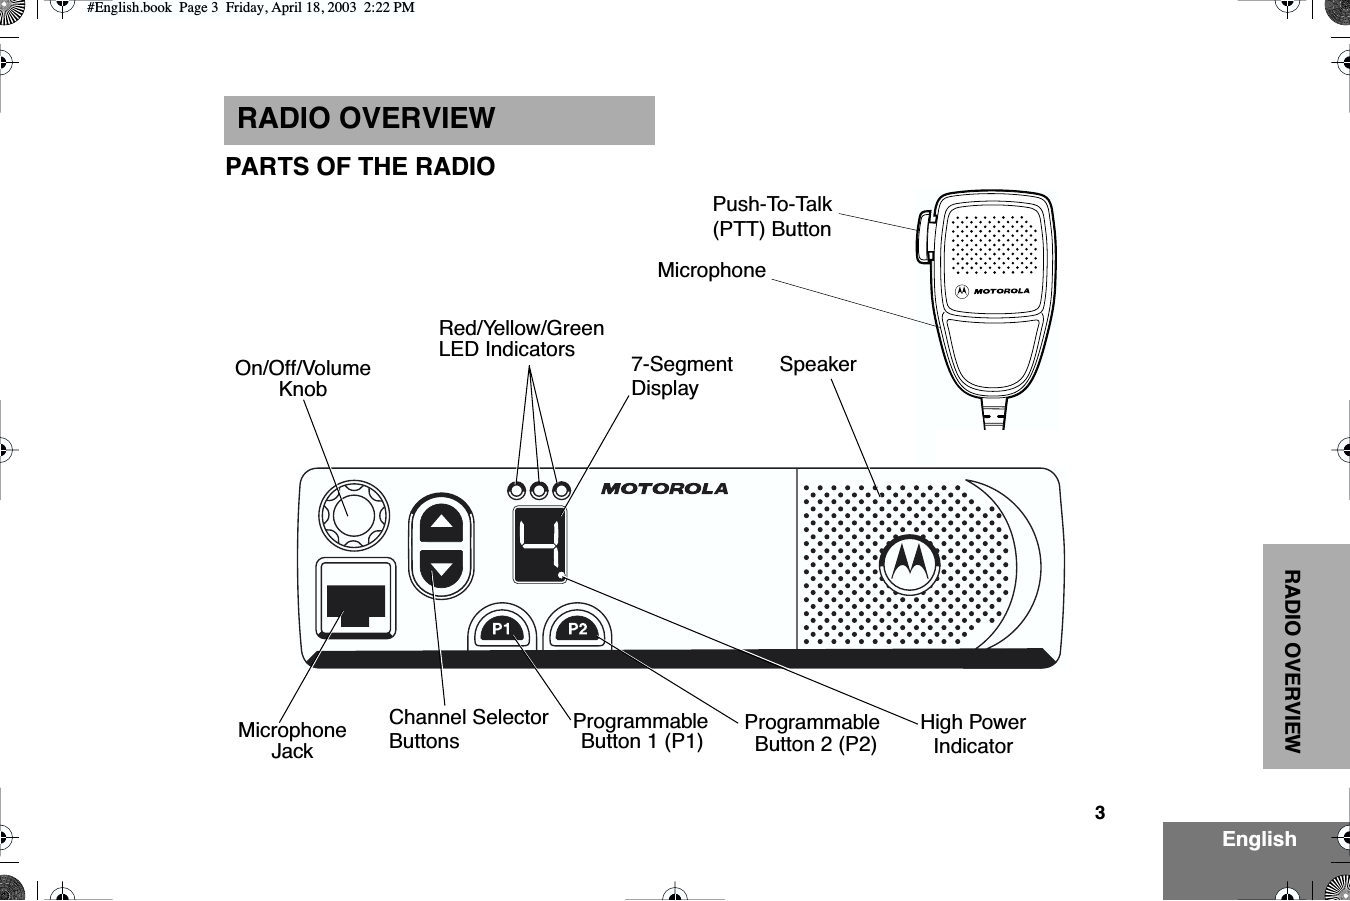  3 EnglishRADIO OVERVIEW RADIO OVERVIEW PARTS OF THE RADIORed/Yellow/GreenLED IndicatorsButton 1 (P1)MicrophoneJackKnobOn/Off/VolumeProgrammable7-SegmentDisplayProgrammableButton 2 (P2)Channel SelectorButtonsPush-To-Talk(PTT) ButtonHigh PowerIndicatorMicrophoneSpeaker #English.book  Page 3  Friday, April 18, 2003  2:22 PM